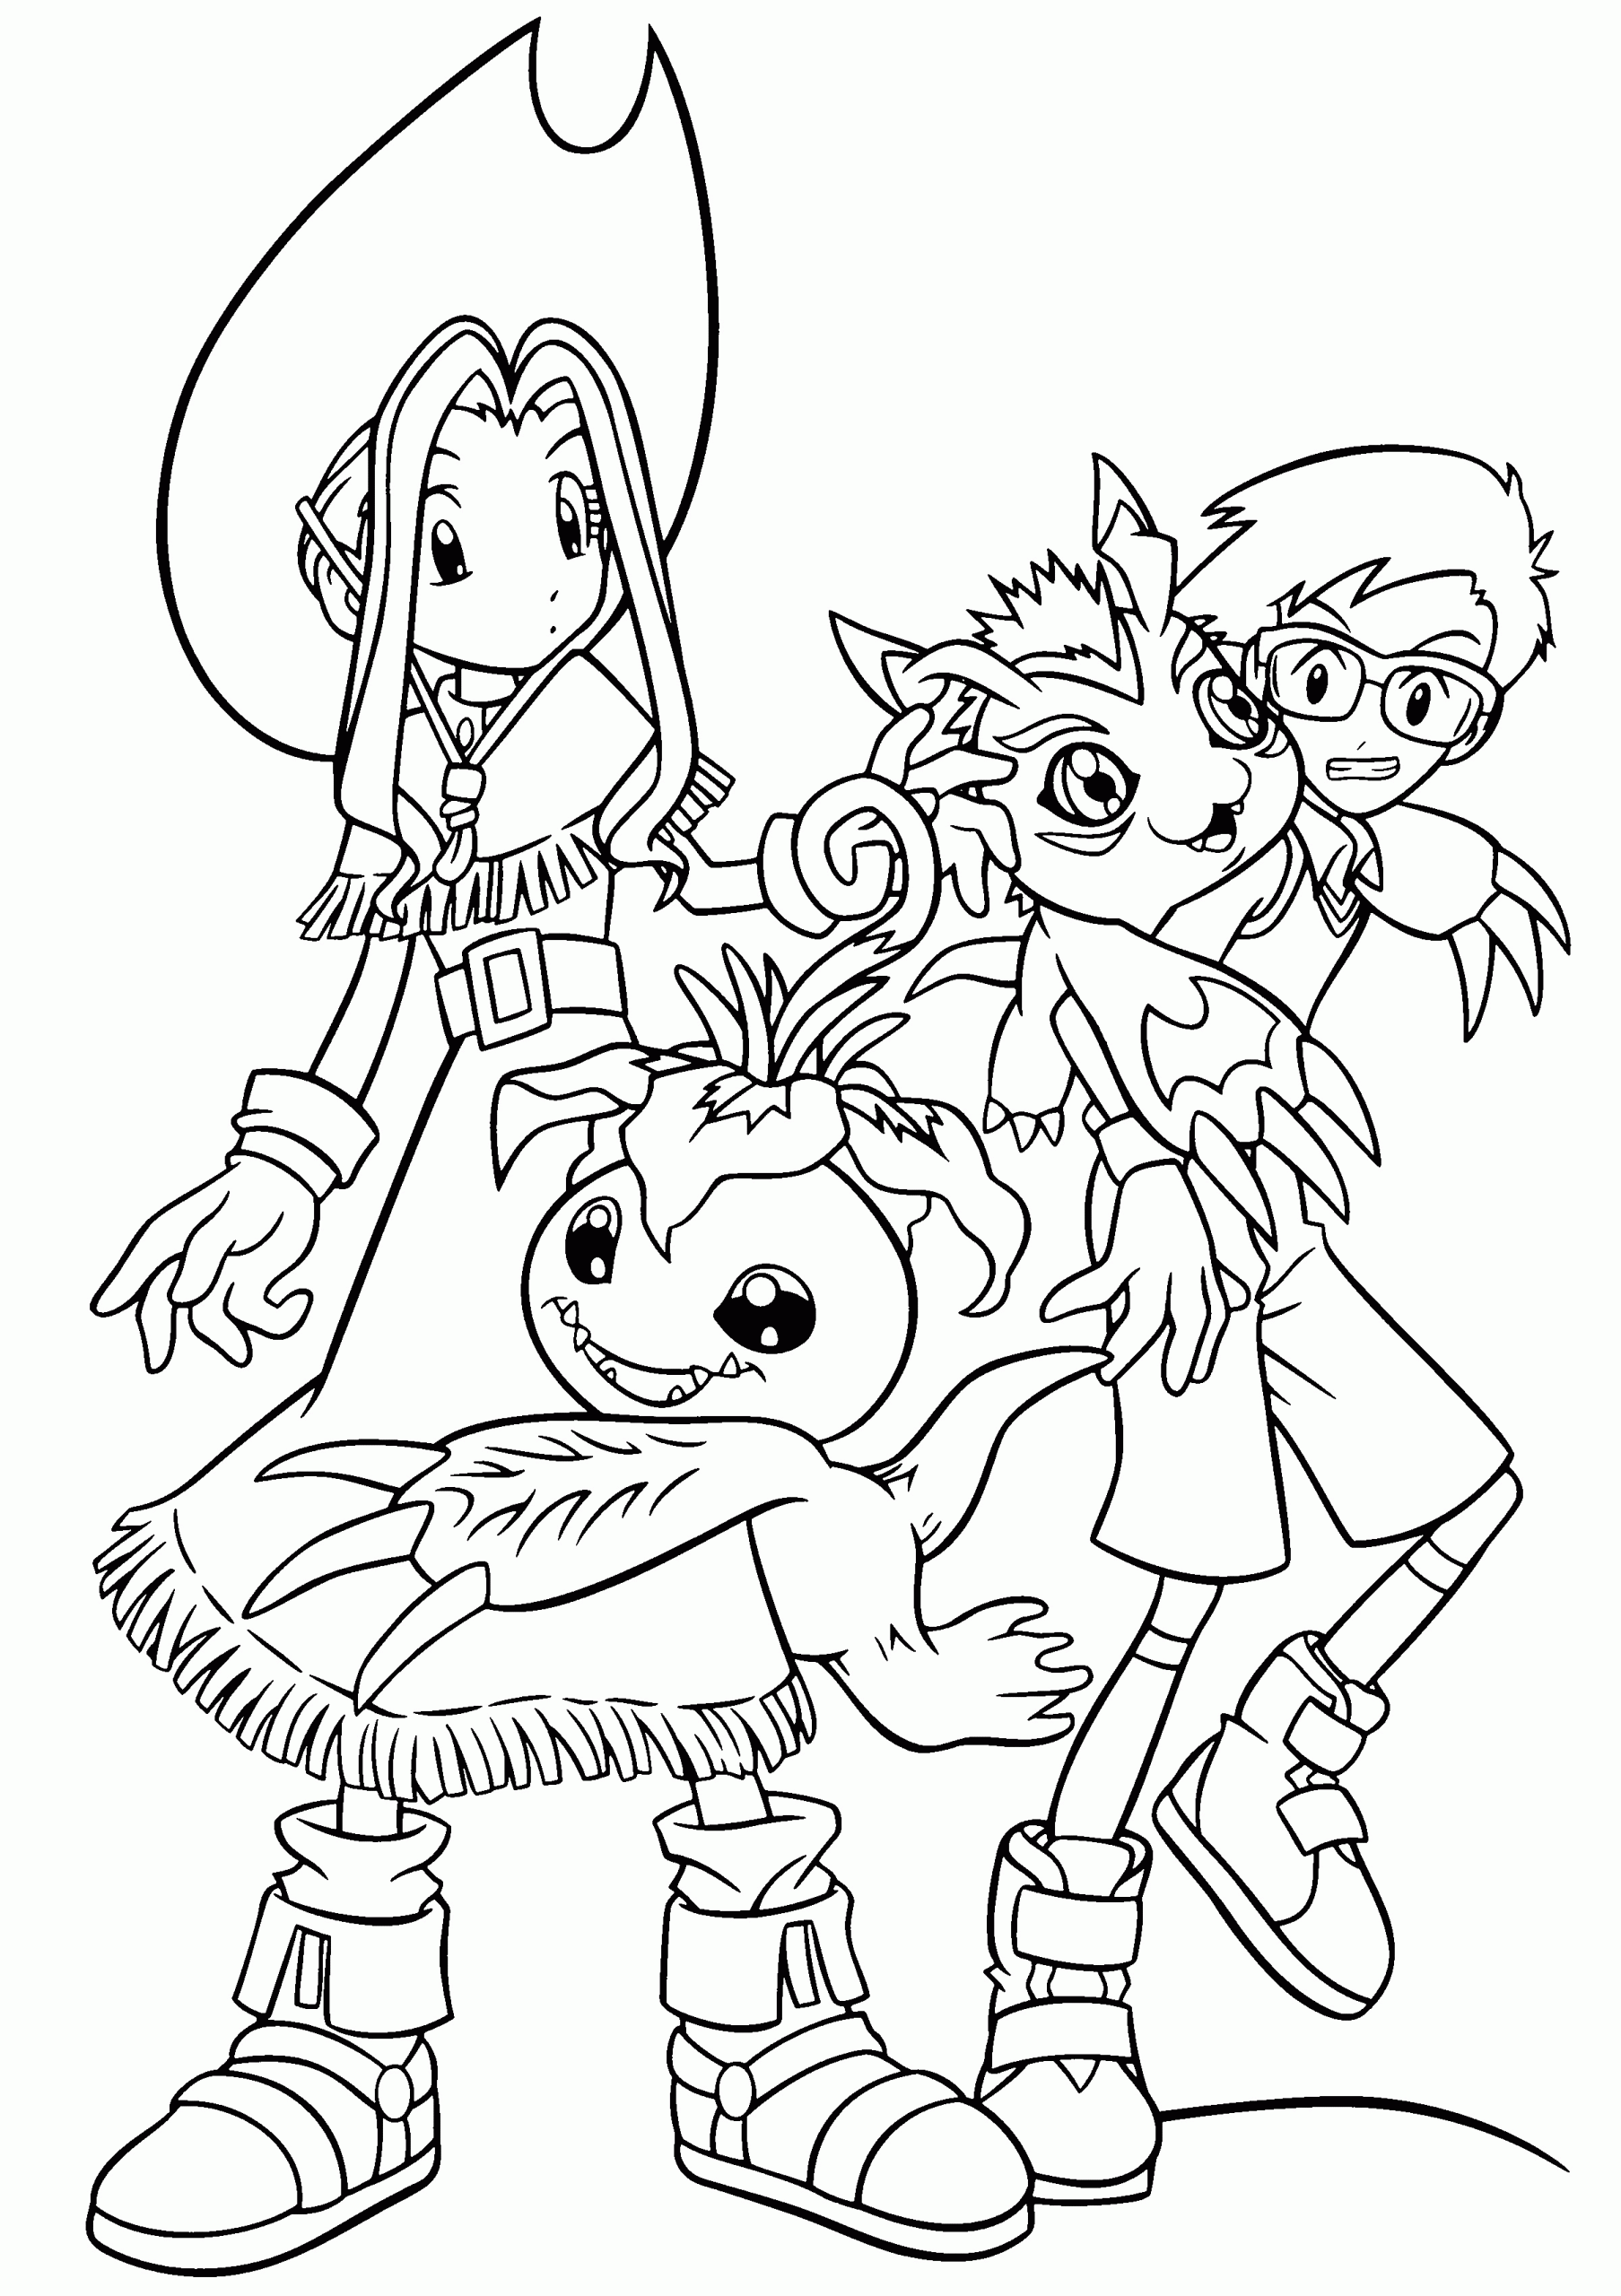 Printable Childrens Coloring Pages
 Free Printable Digimon Coloring Pages For Kids